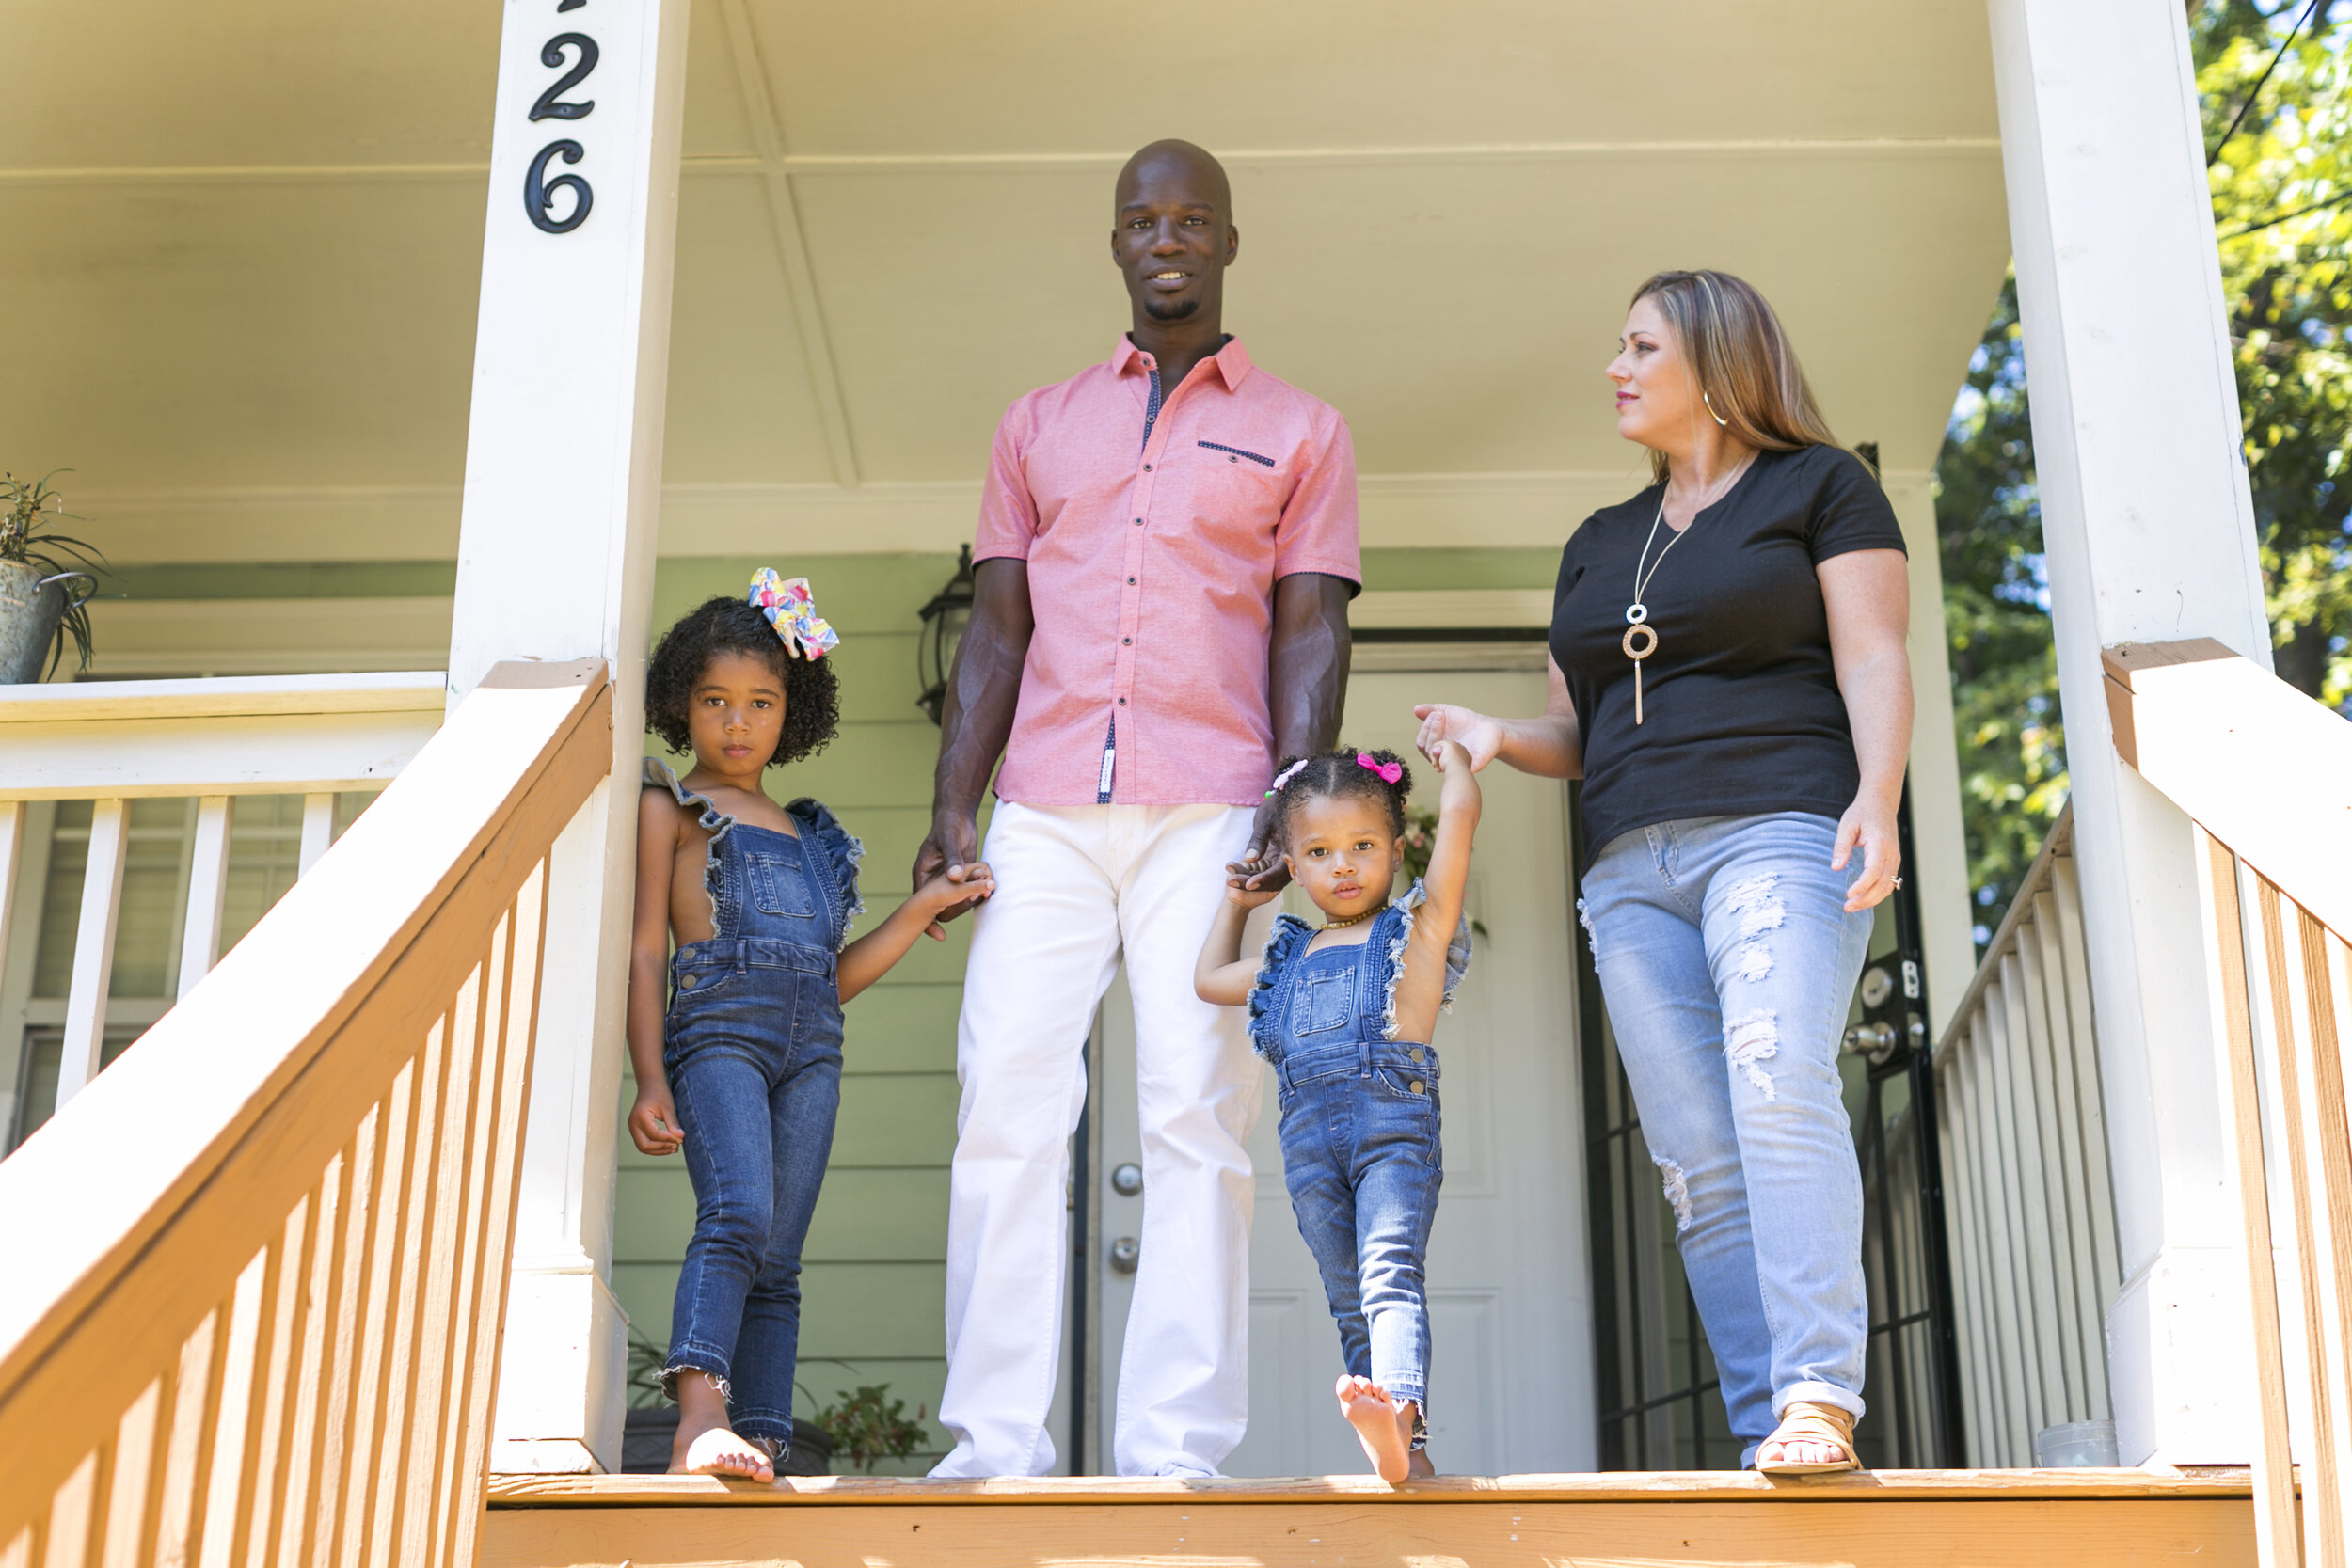 Michelle Witherspoon, Larry Witherspoon, and their two children stand on the porch of the home they purchased via a mortgage from FCS Community Finance. Photo by Becca Stanley.